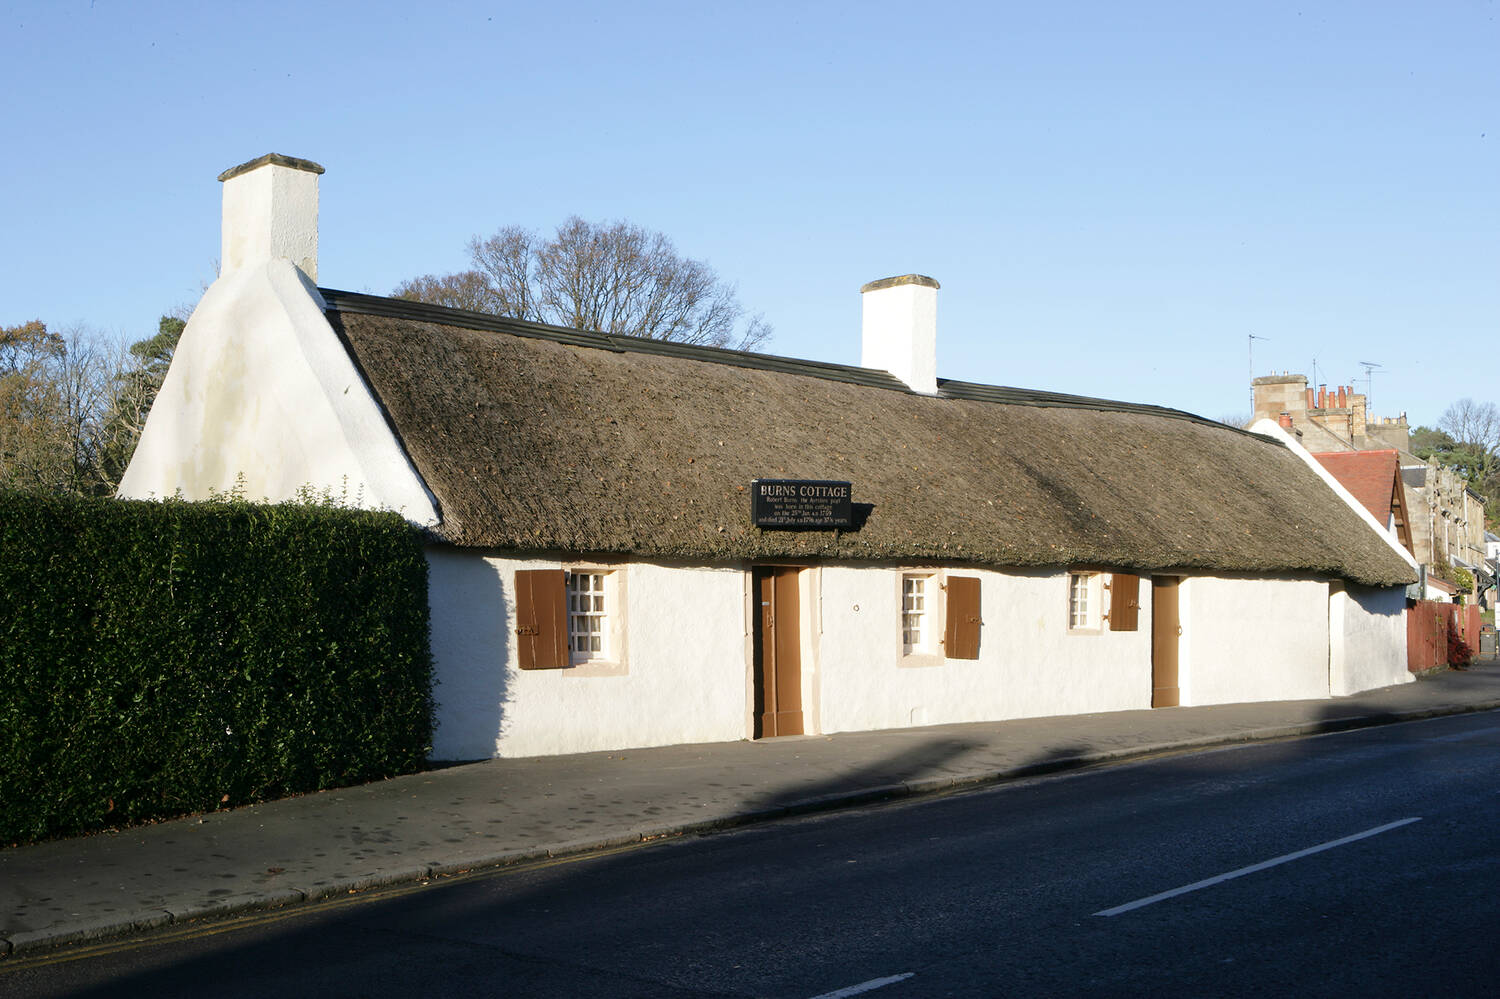 A white thatched cottage stands on the side of a road with a blue sky background.